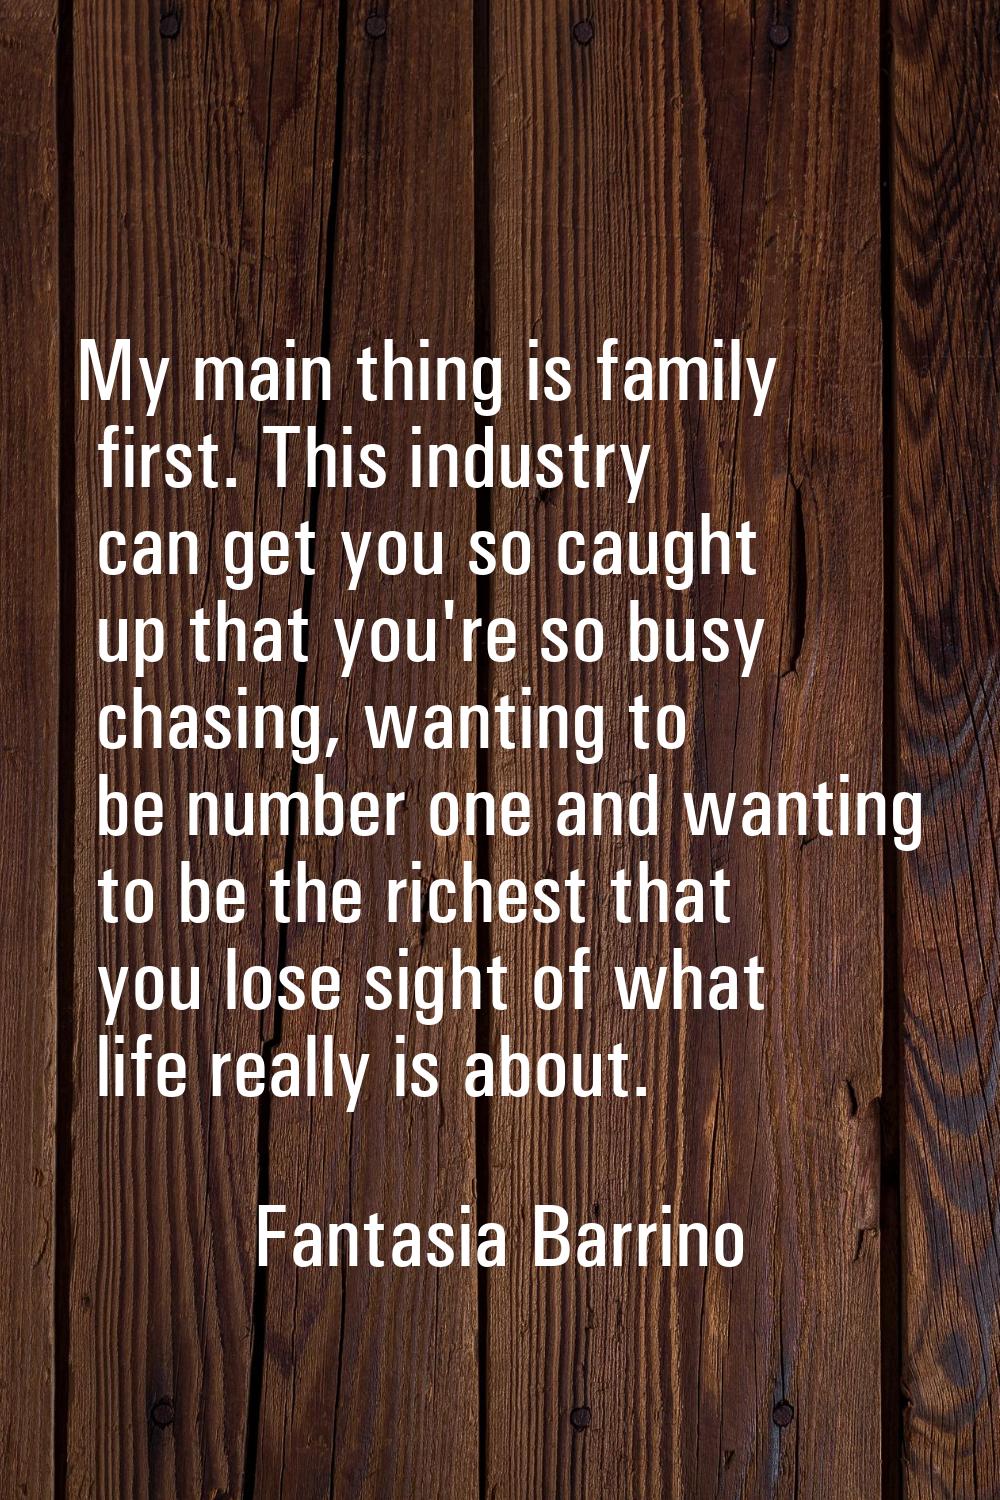 My main thing is family first. This industry can get you so caught up that you're so busy chasing, 